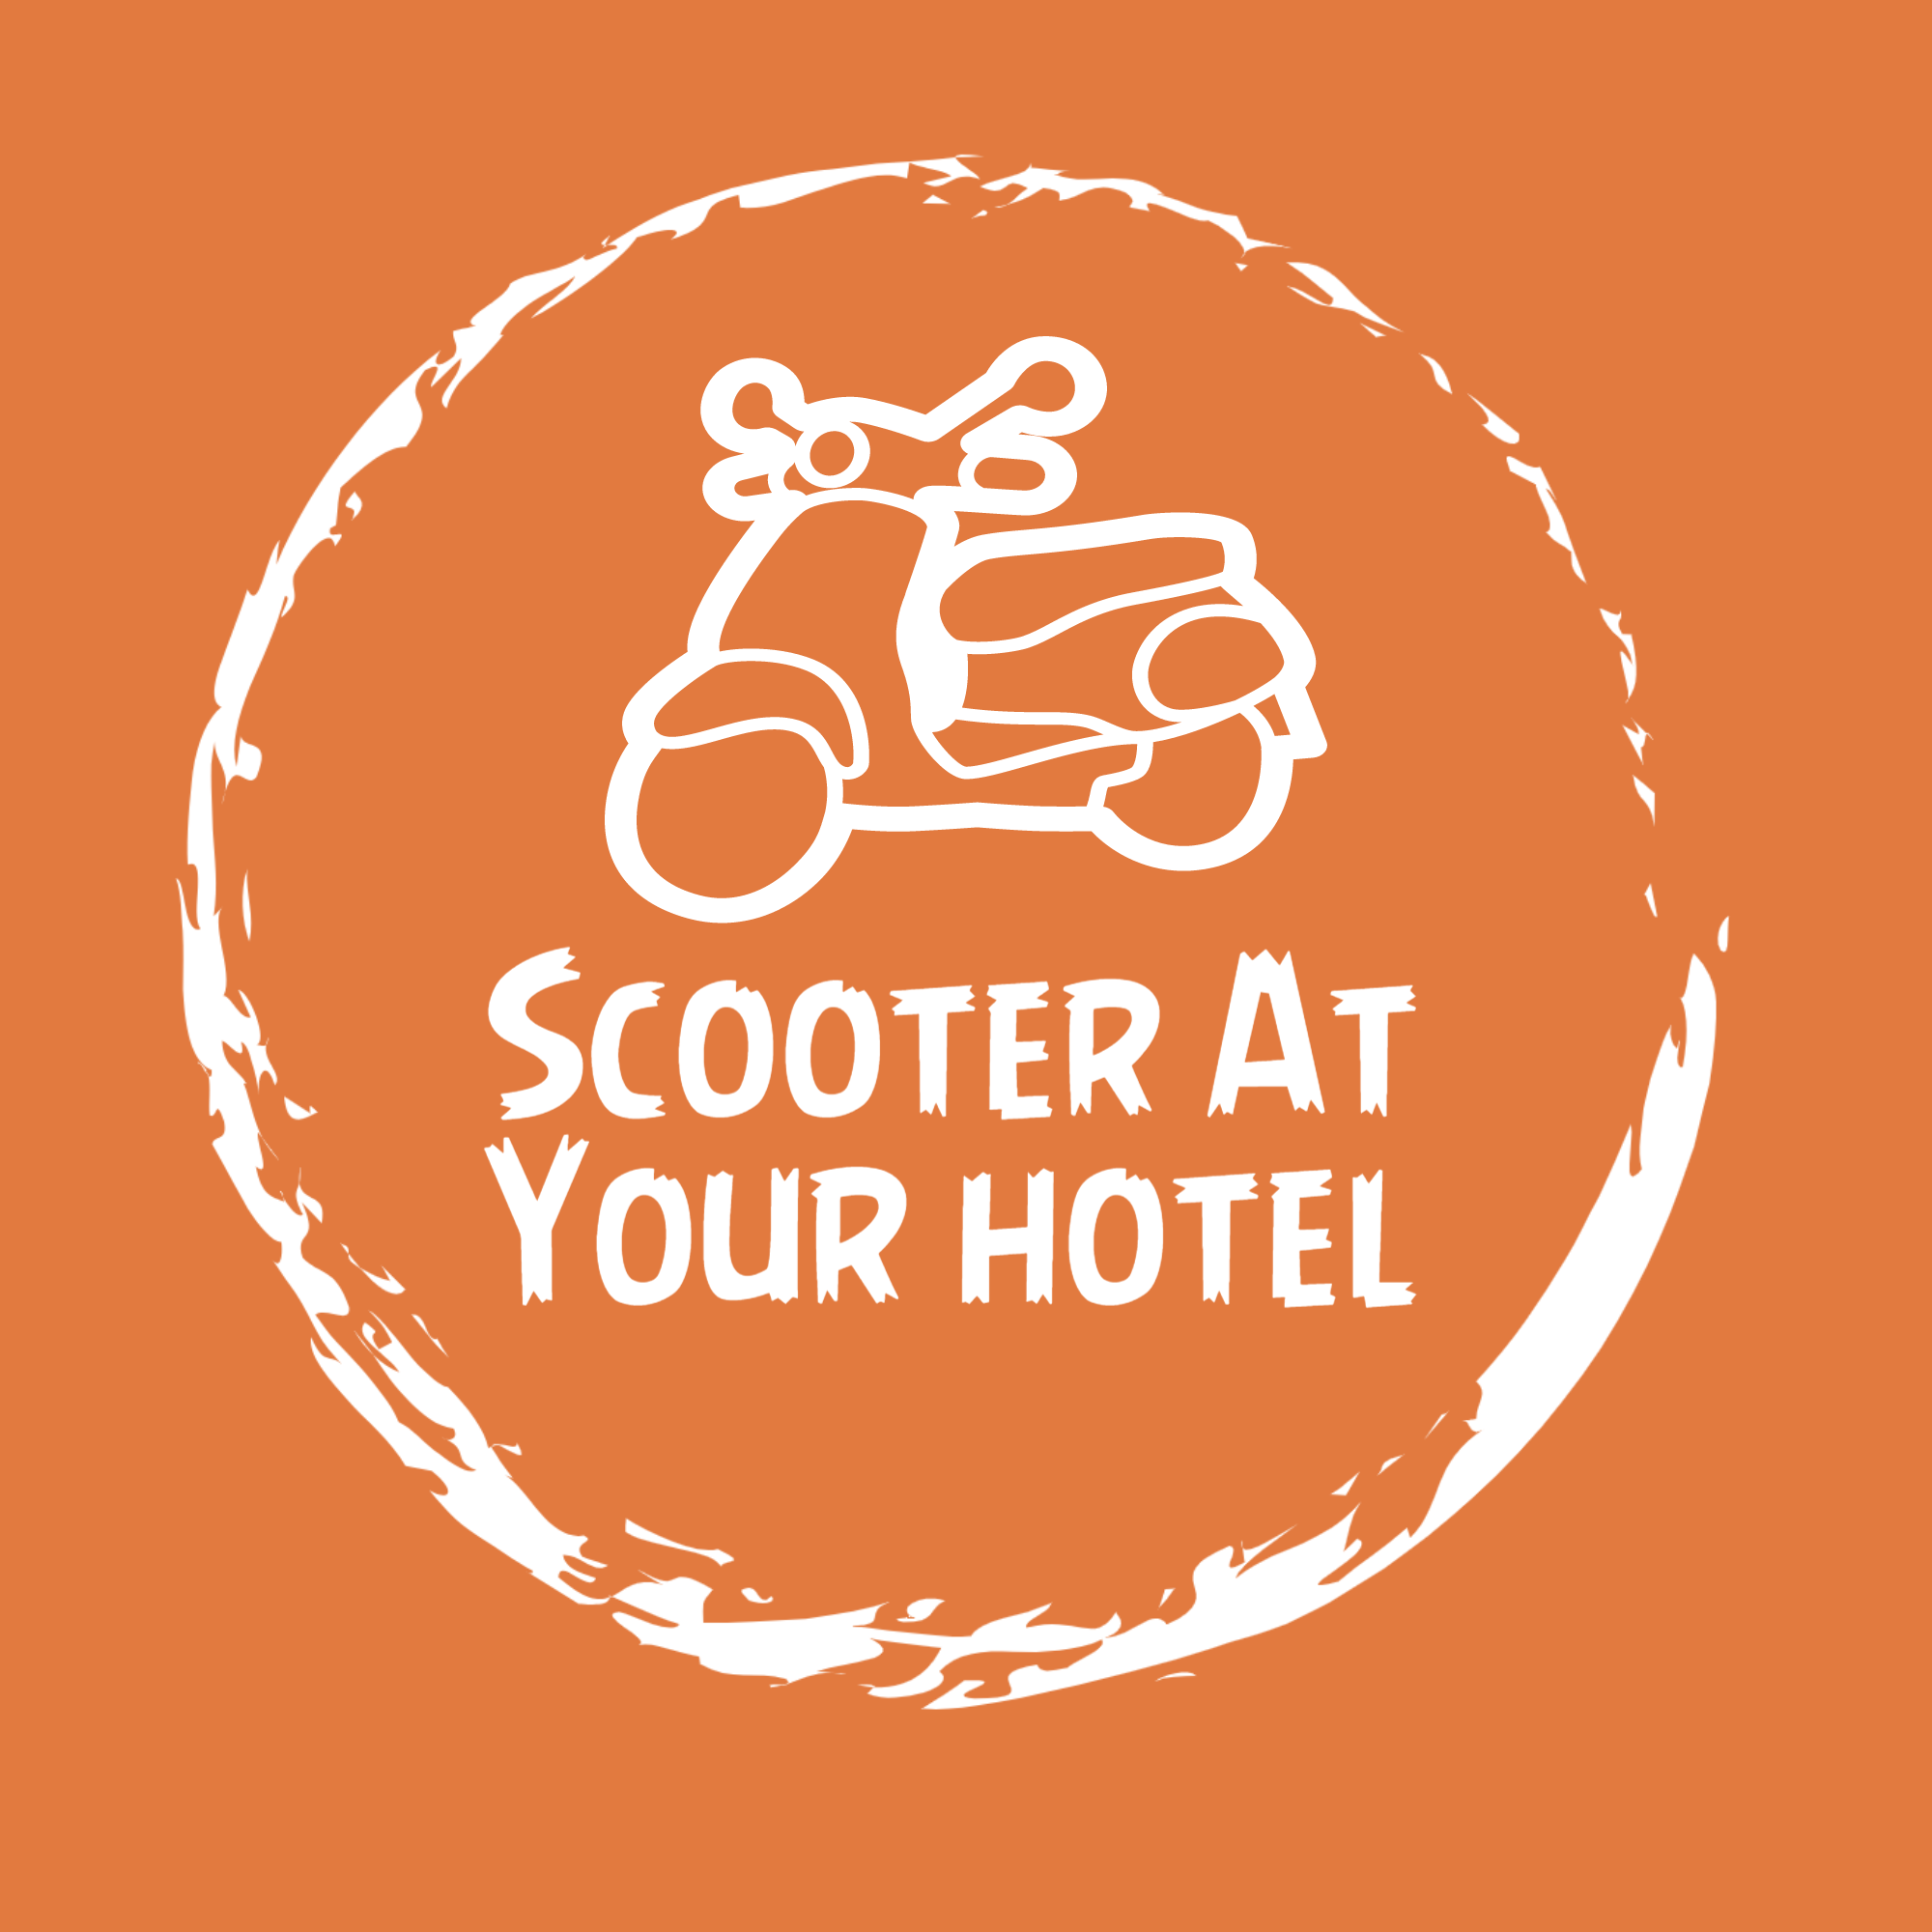 Scooter At Your Hotel